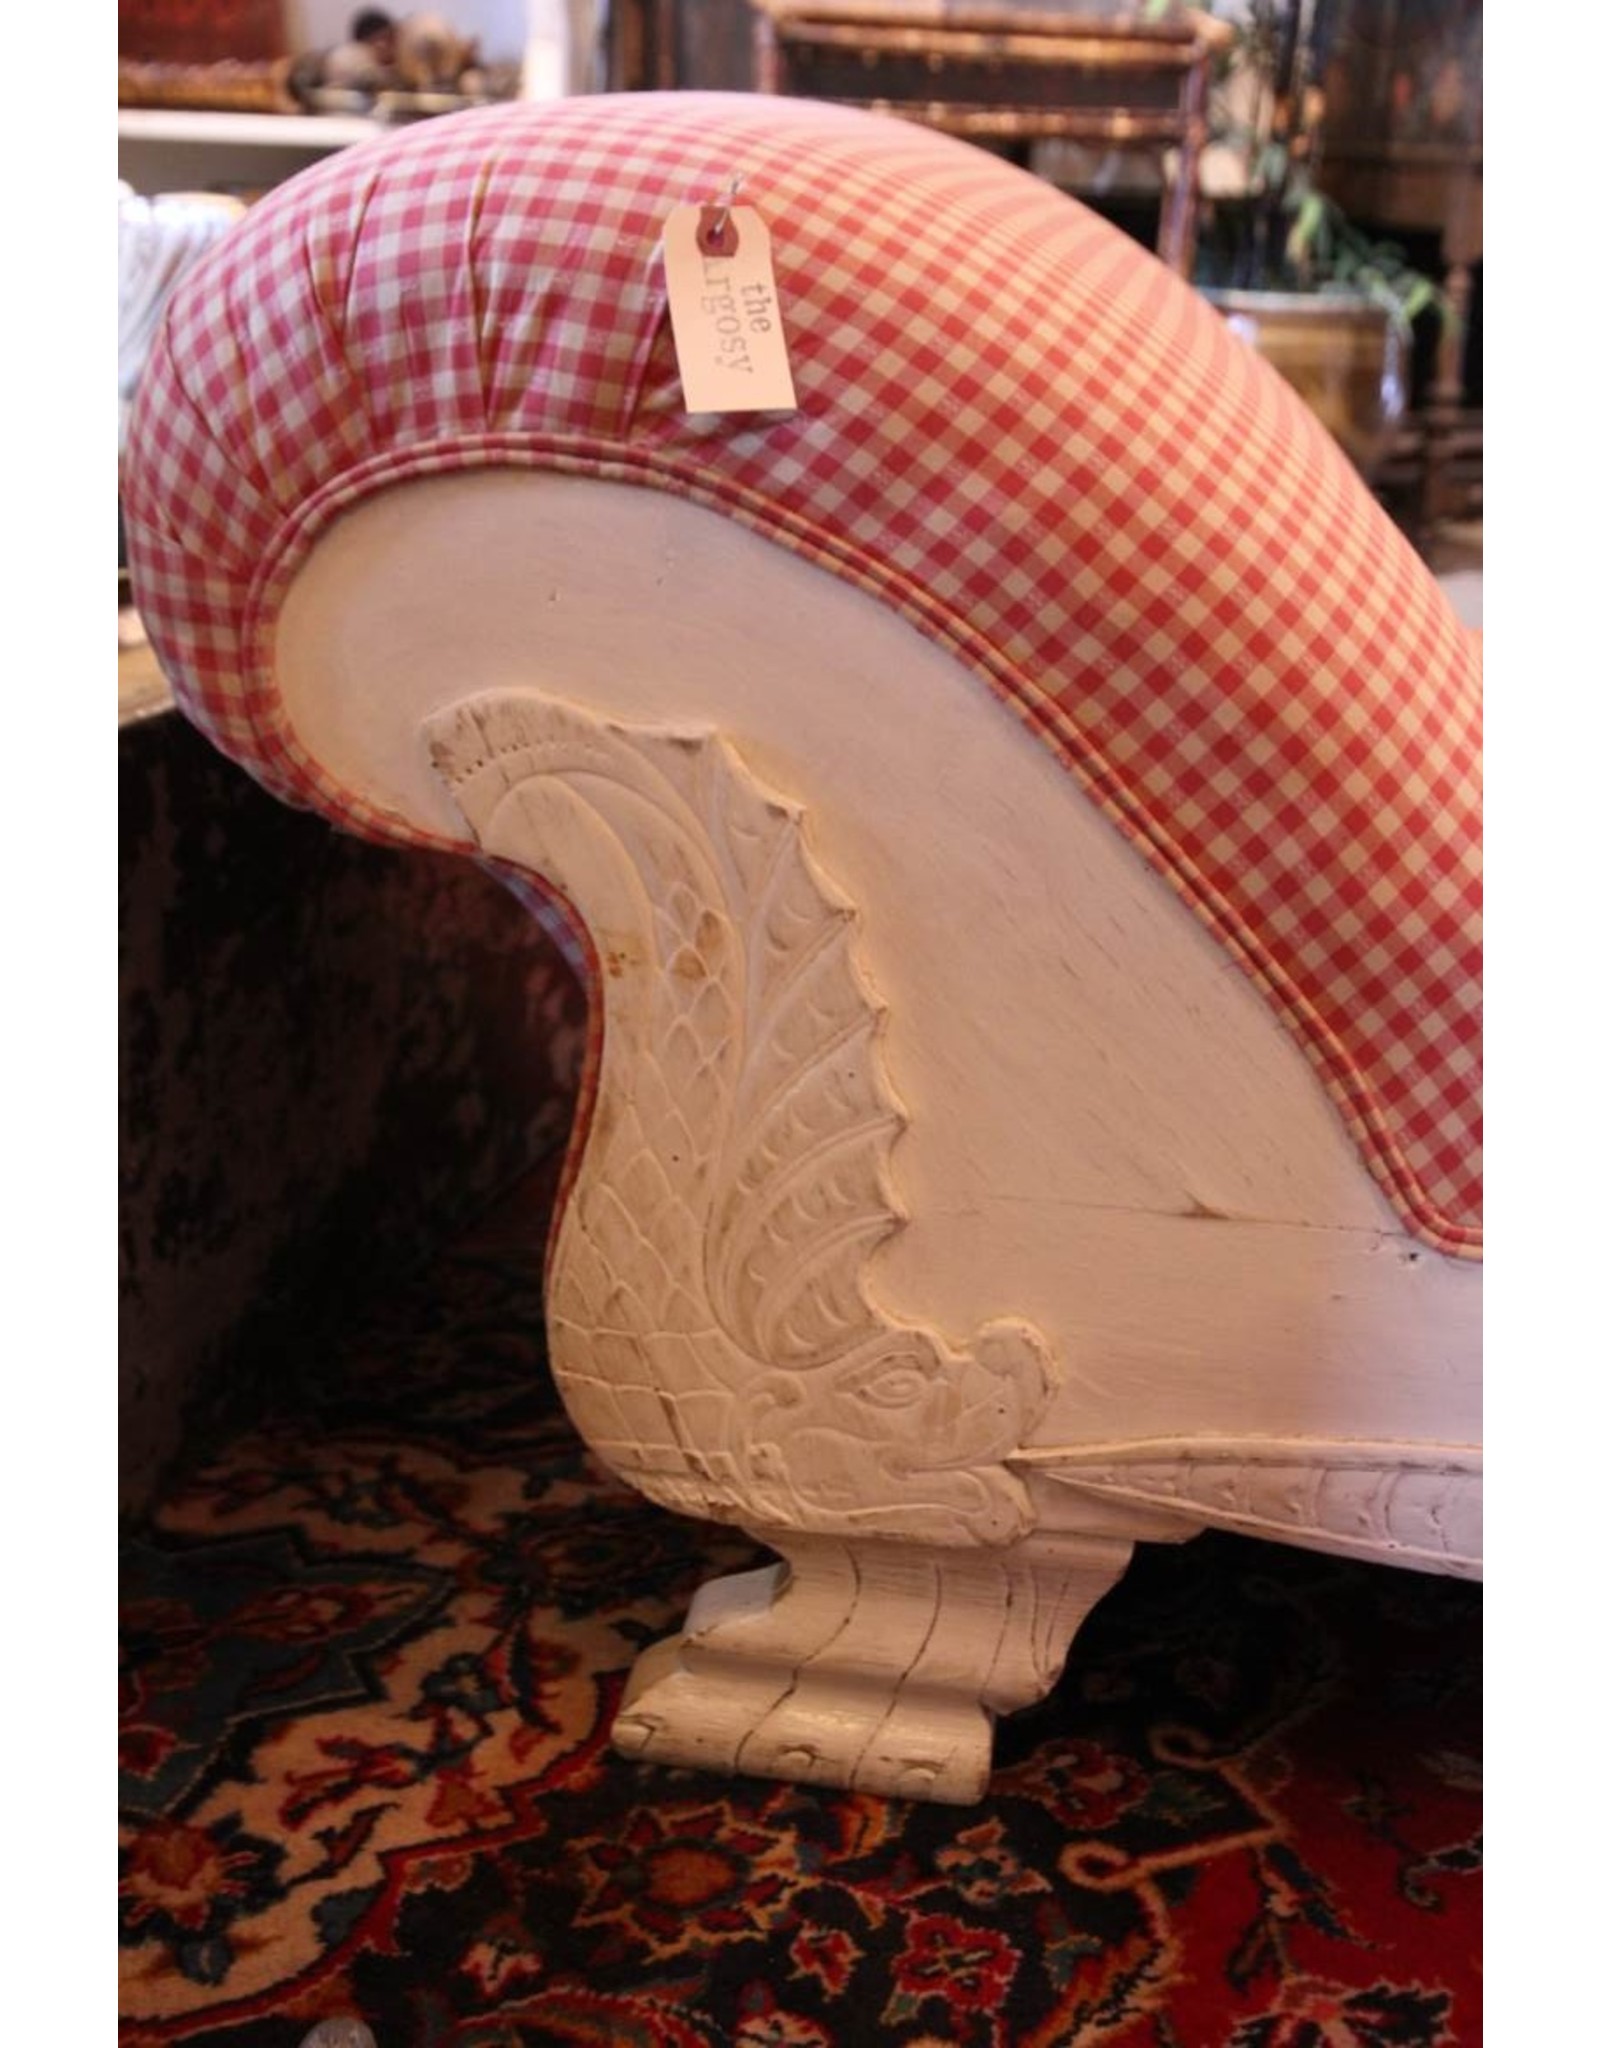 Chaise - Edwardian, white painted base, checkered upholstery